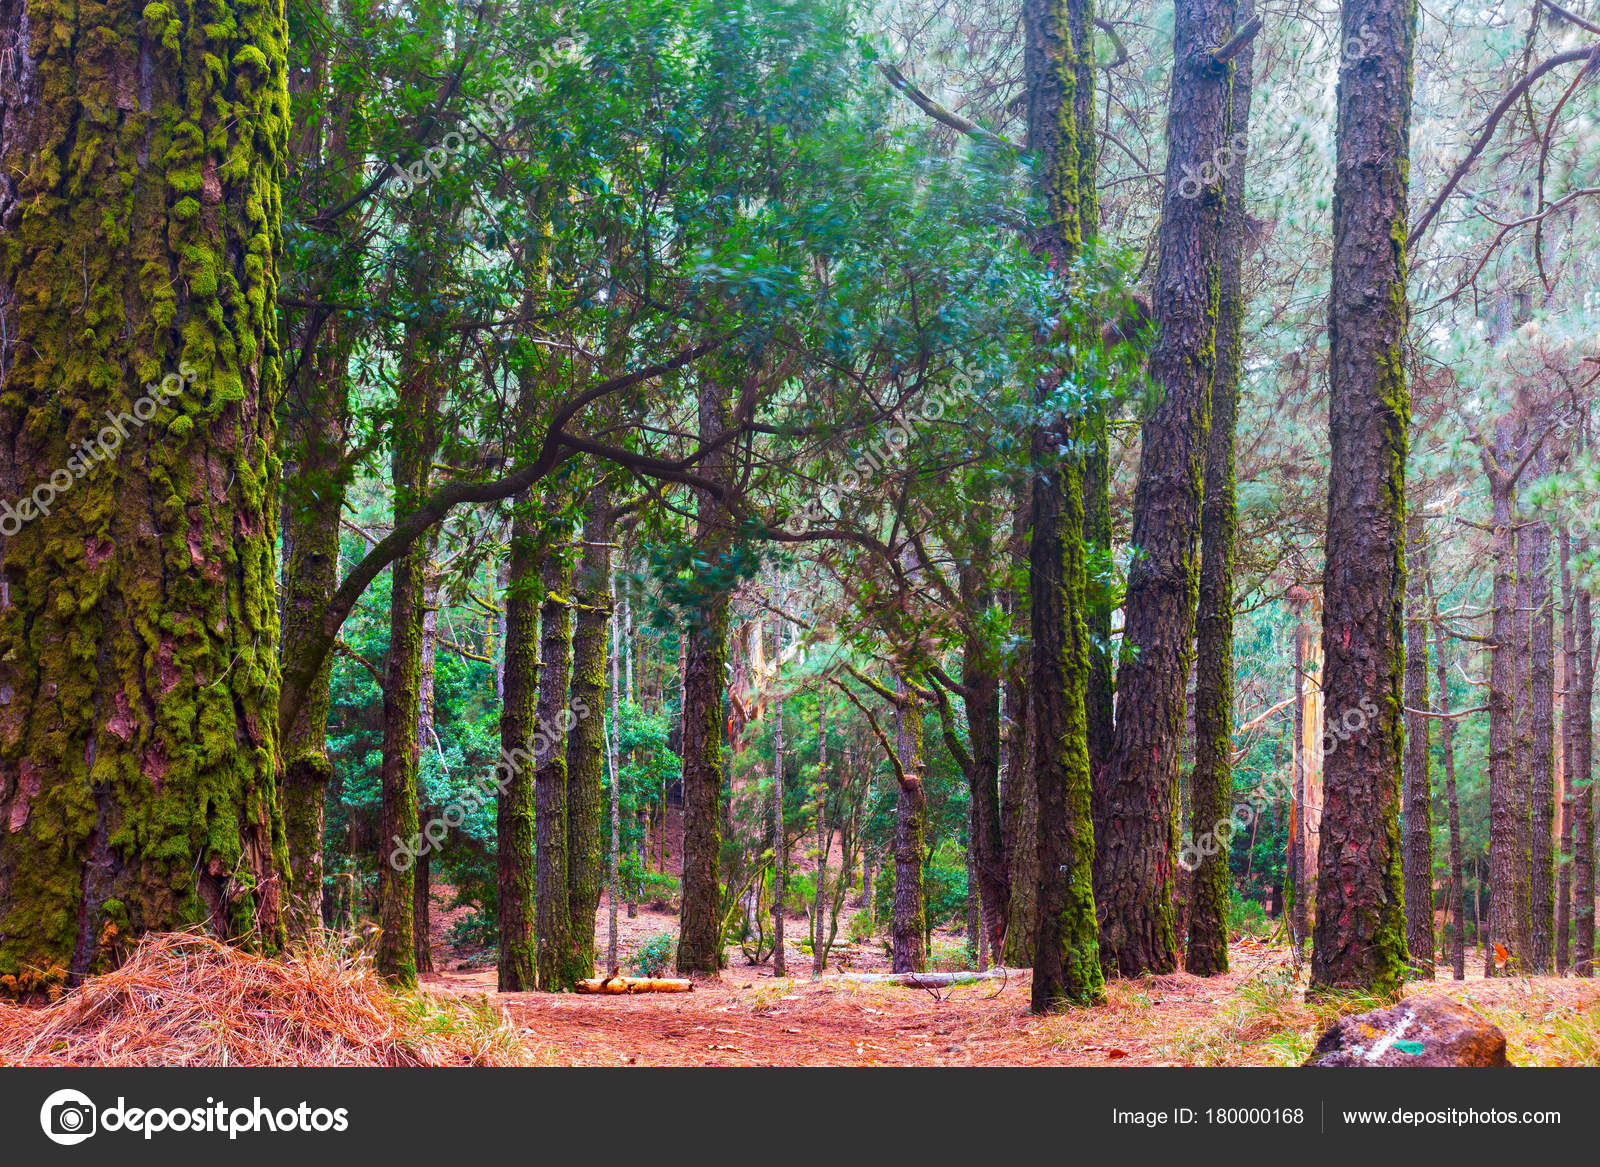 Pine Trees In Foggy Forest — Stock Photo © Zoooom 180000168